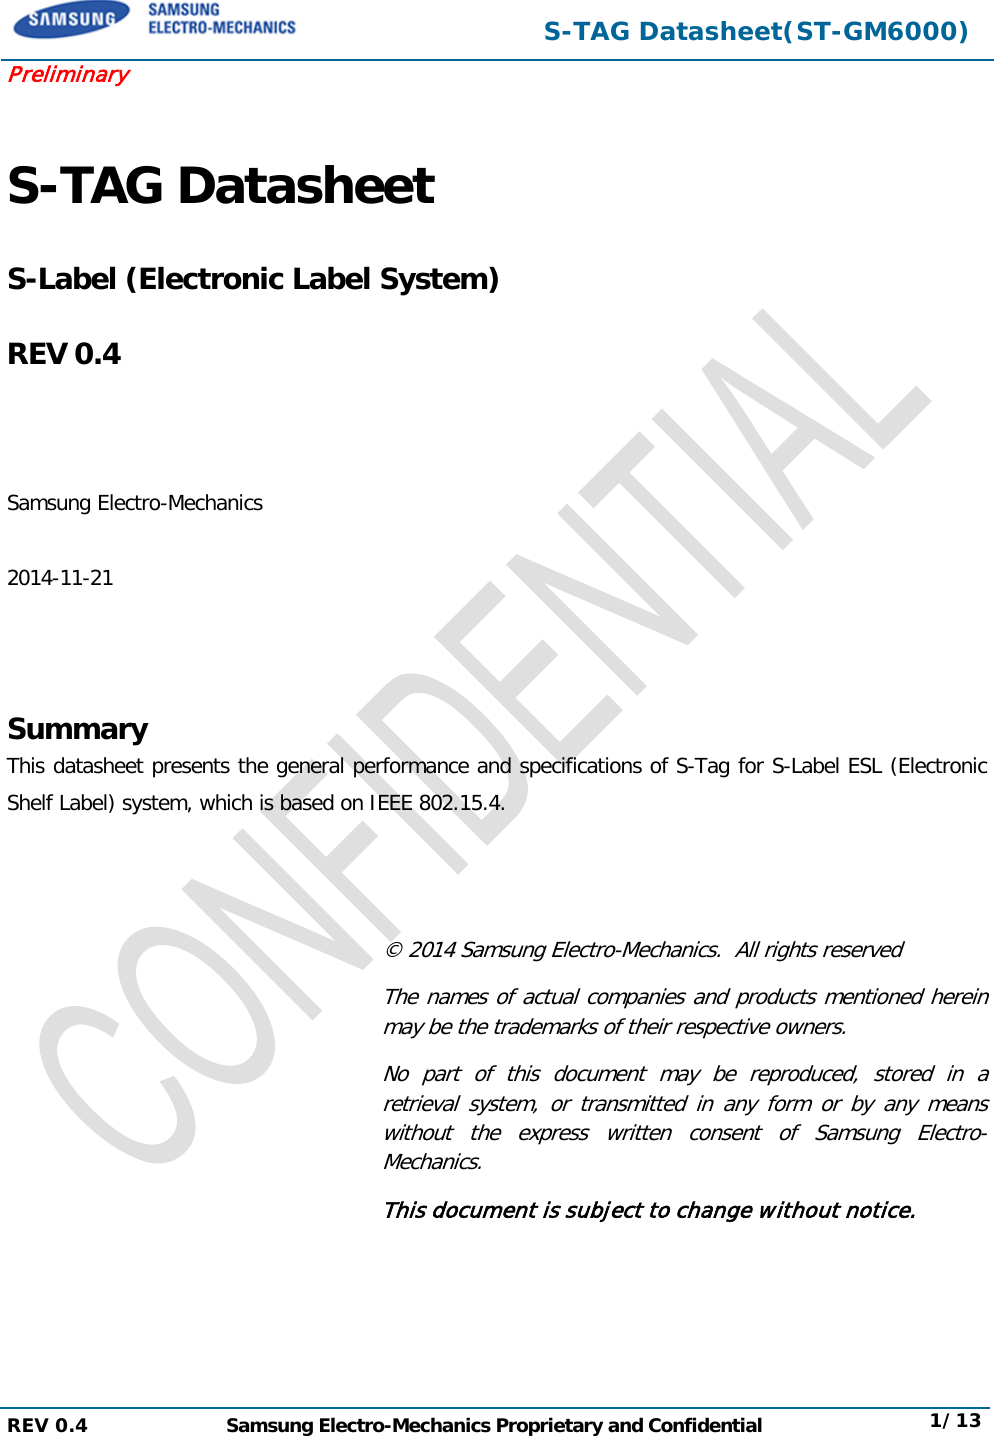 S-TAG Datasheet(ST-GM6000) Preliminary S-TAG Datasheet S-Label (Electronic Label System) REV 0.4 Samsung Electro-Mechanics 2014-11-21 Summary This datasheet presents the general performance and specifications of S-Tag for S-Label ESL (Electronic Shelf Label) system, which is based on IEEE 802.15.4. © 2014 Samsung Electro-Mechanics.  All rights reserved The names of actual companies and products mentioned herein may be the trademarks of their respective owners. No part of this document may be reproduced, stored in a retrieval system, or transmitted in any form or by any means without the express written consent of Samsung Electro-Mechanics. This document is subject to change without notice. REV 0.4  Samsung Electro-Mechanics Proprietary and Confidential 1/13 